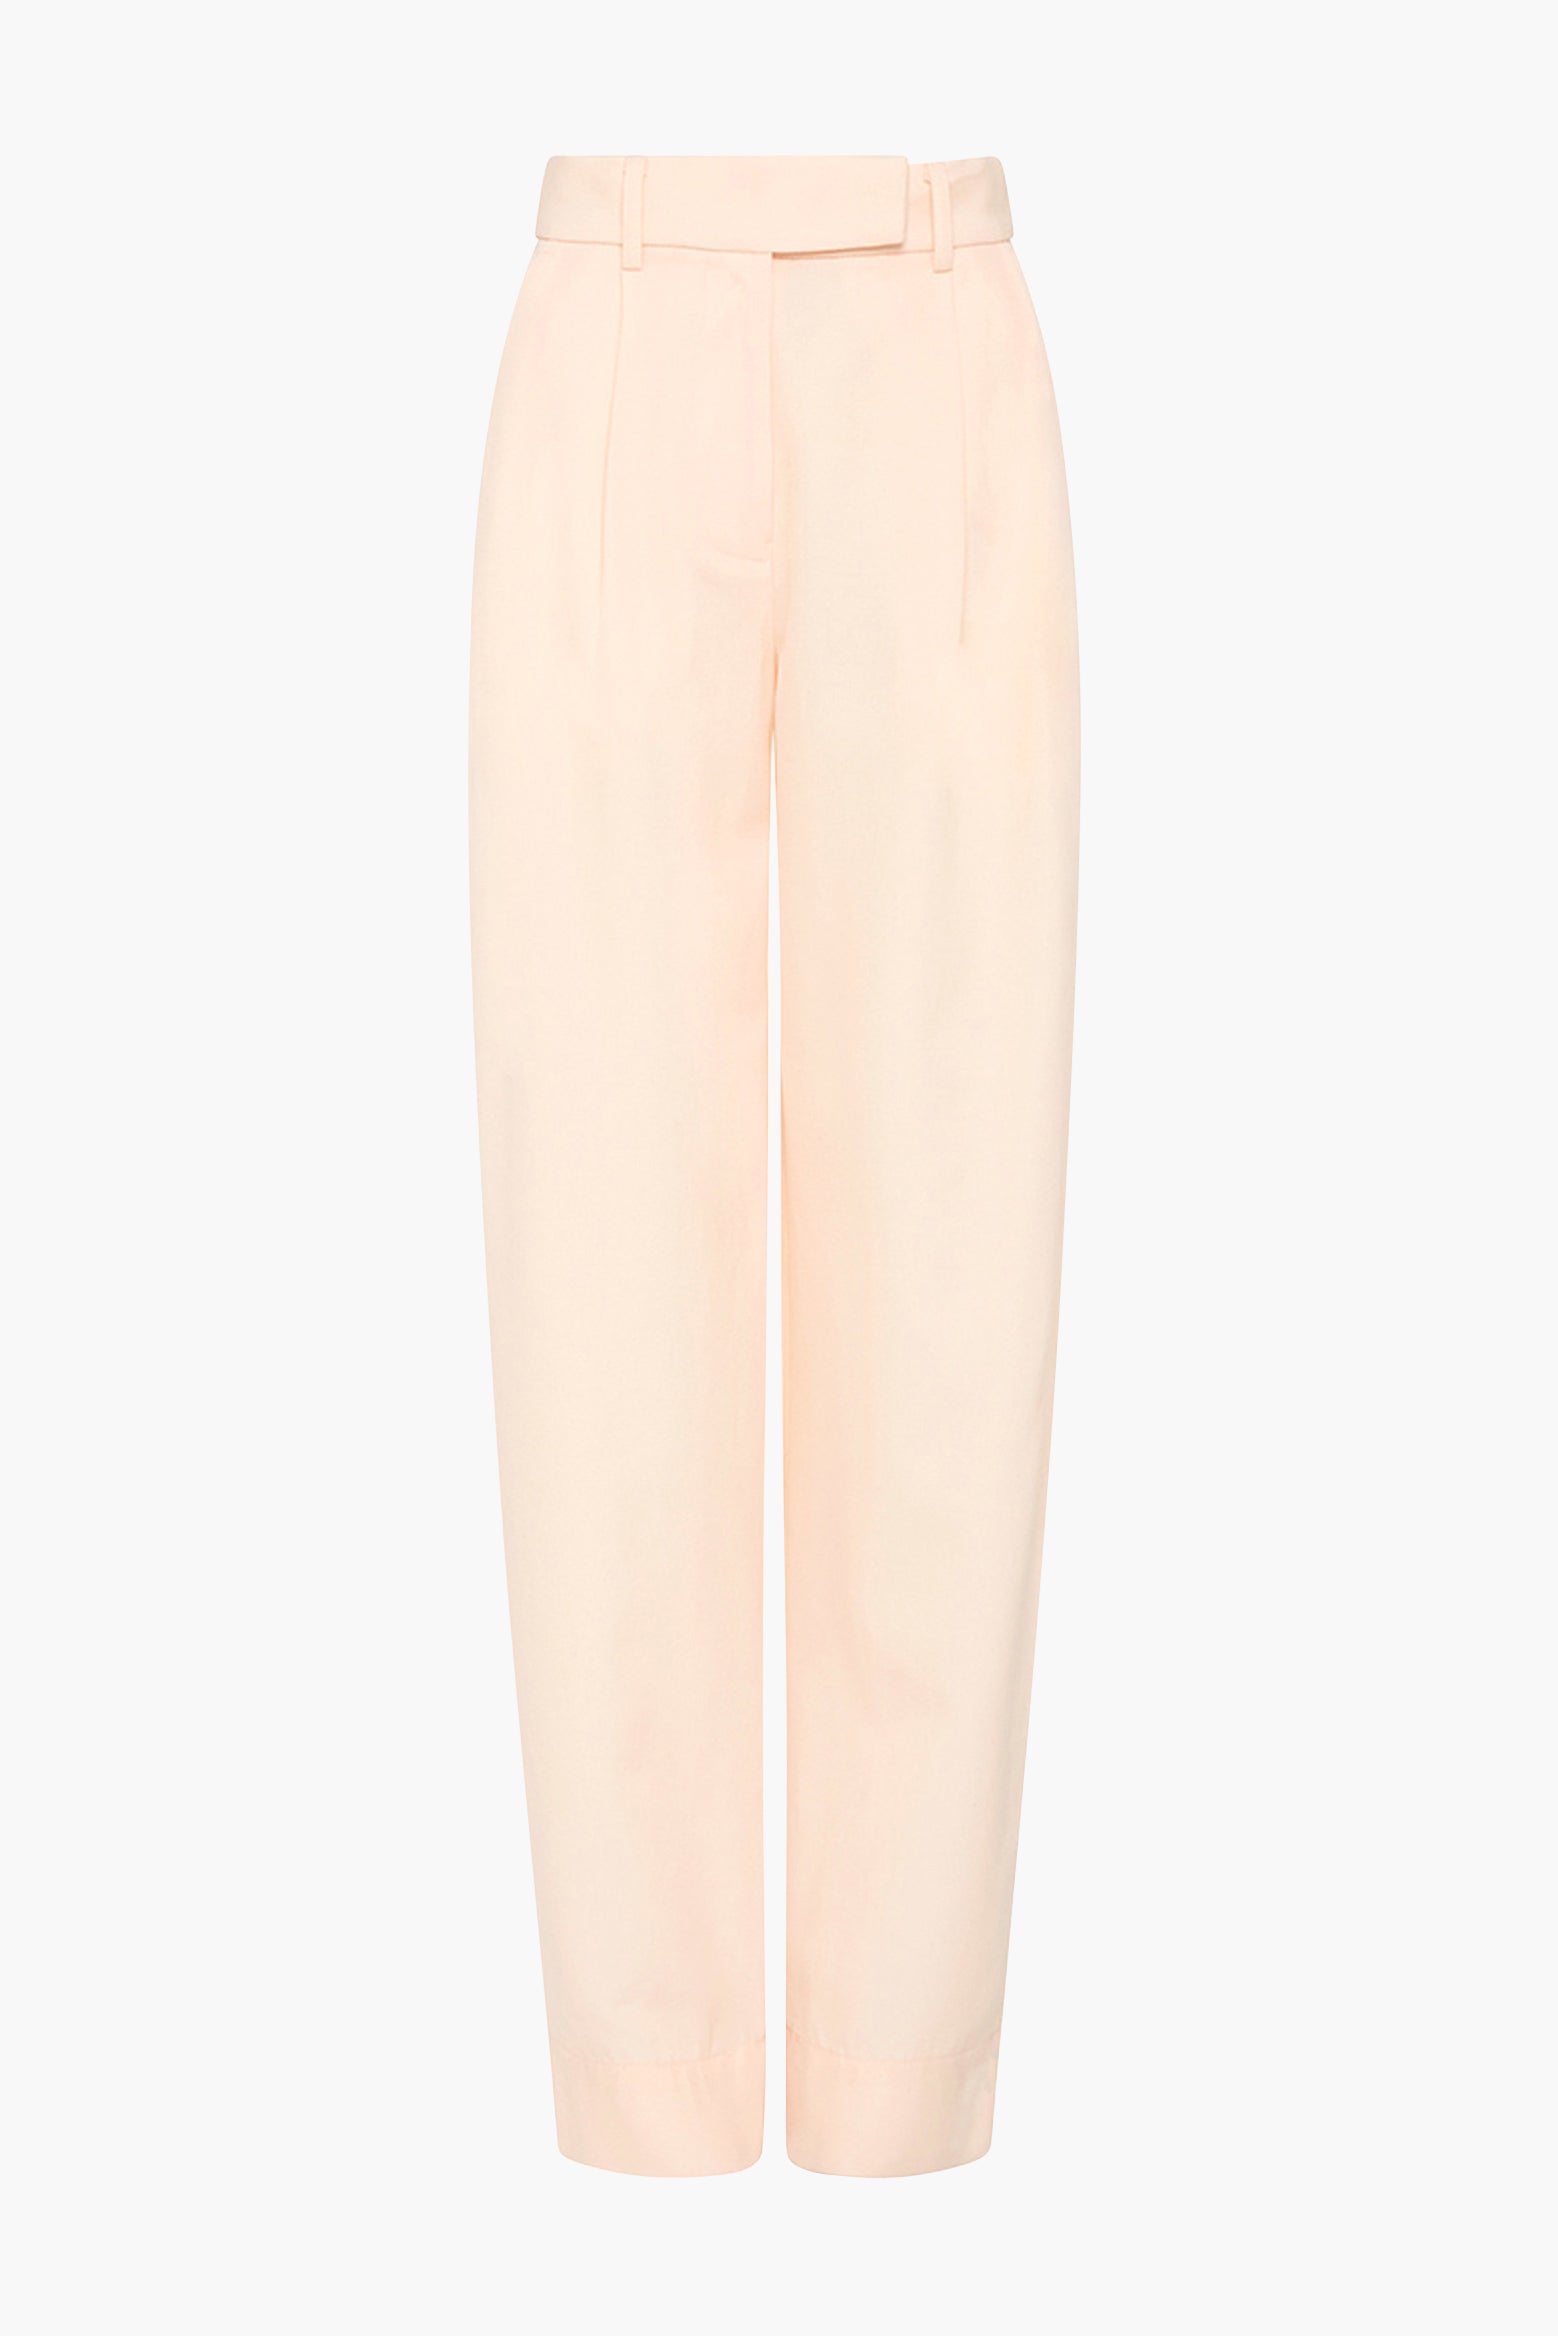 Esse Classico Waist Tailored Trouser in Crema available at TNT The New Trend.